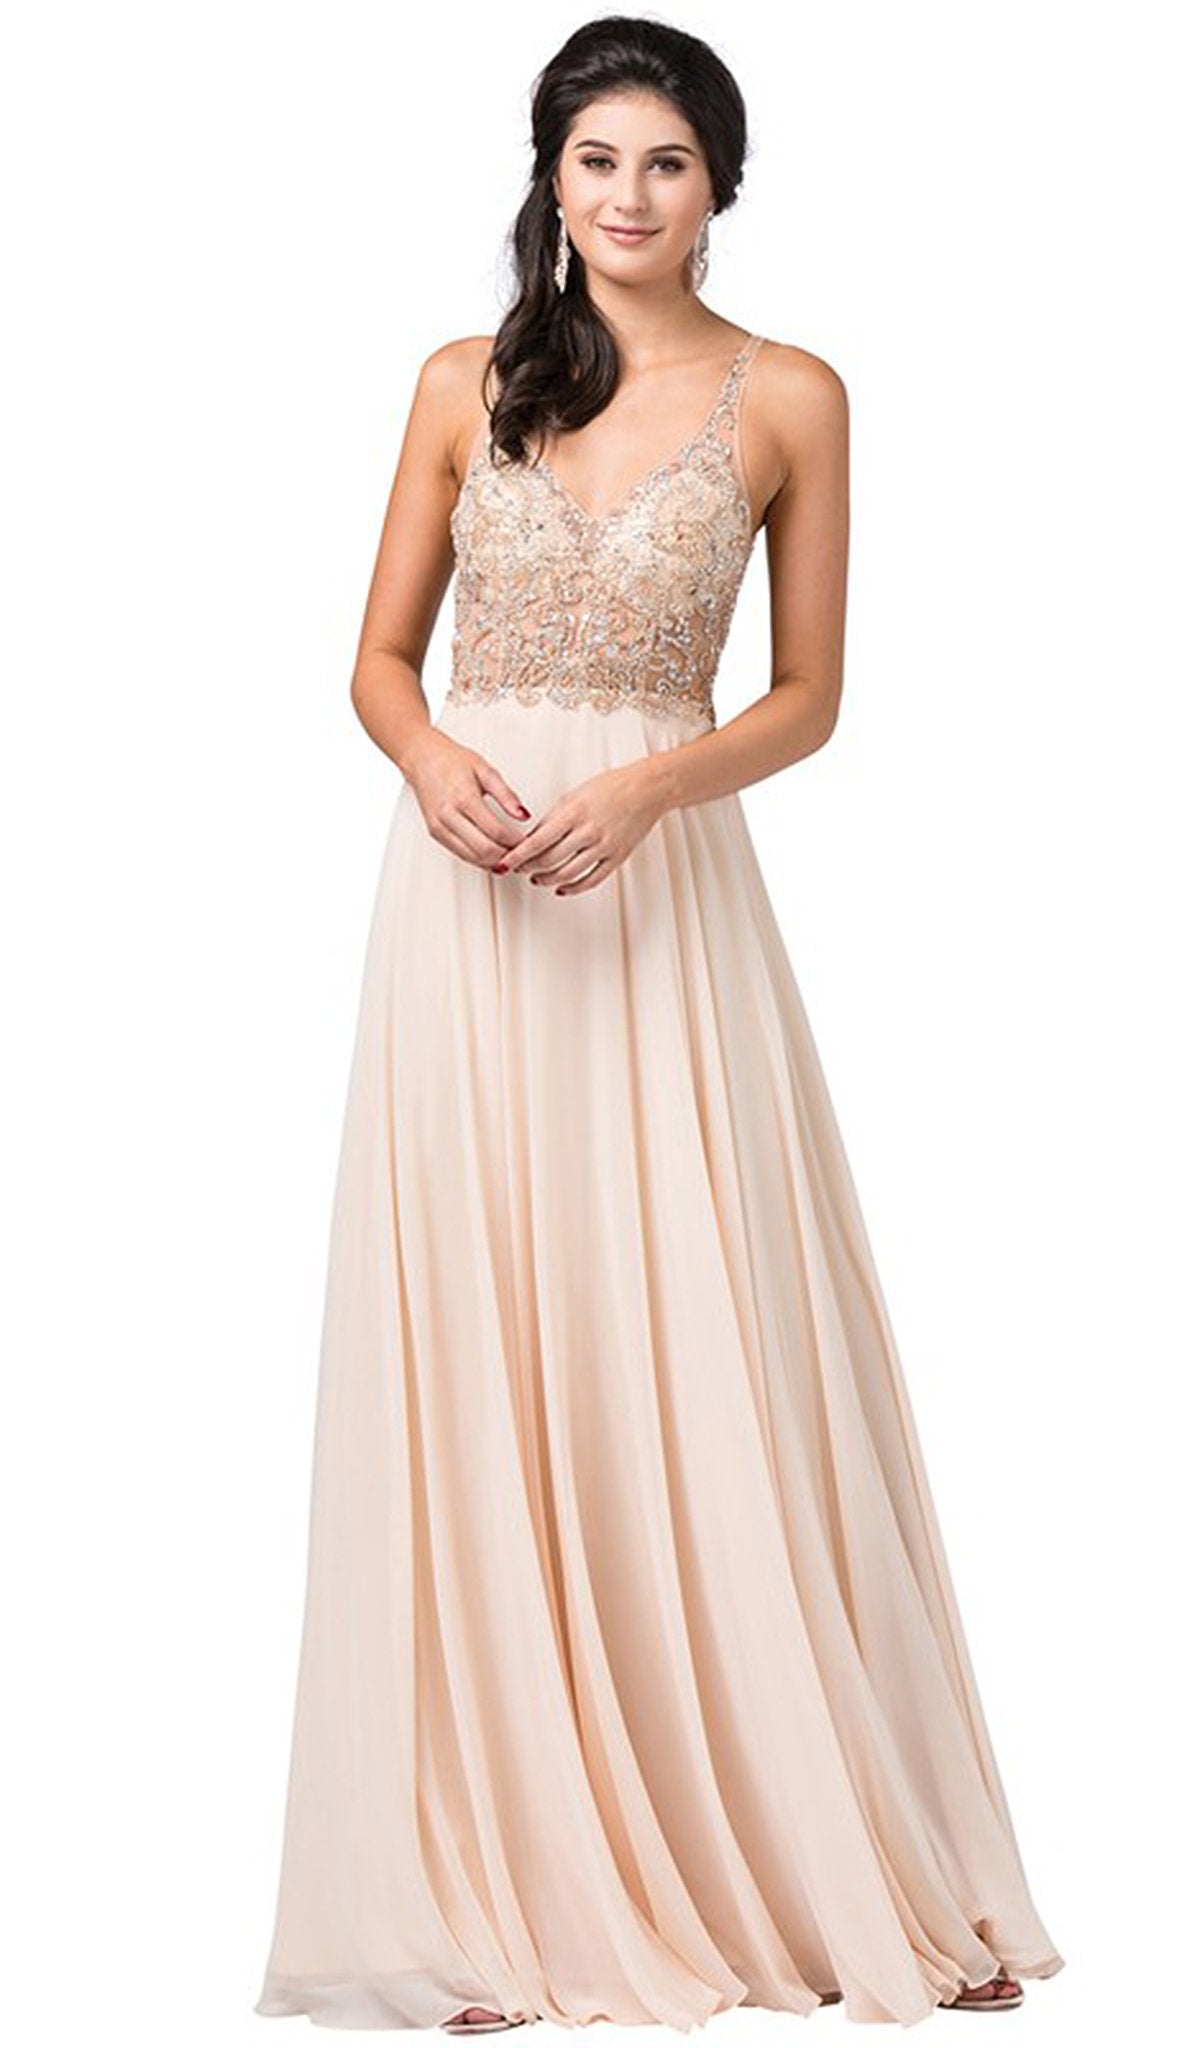 Dancing Queen - 2513 Beaded Embellished Illusion Bodice Chiffon Gown In Neutral